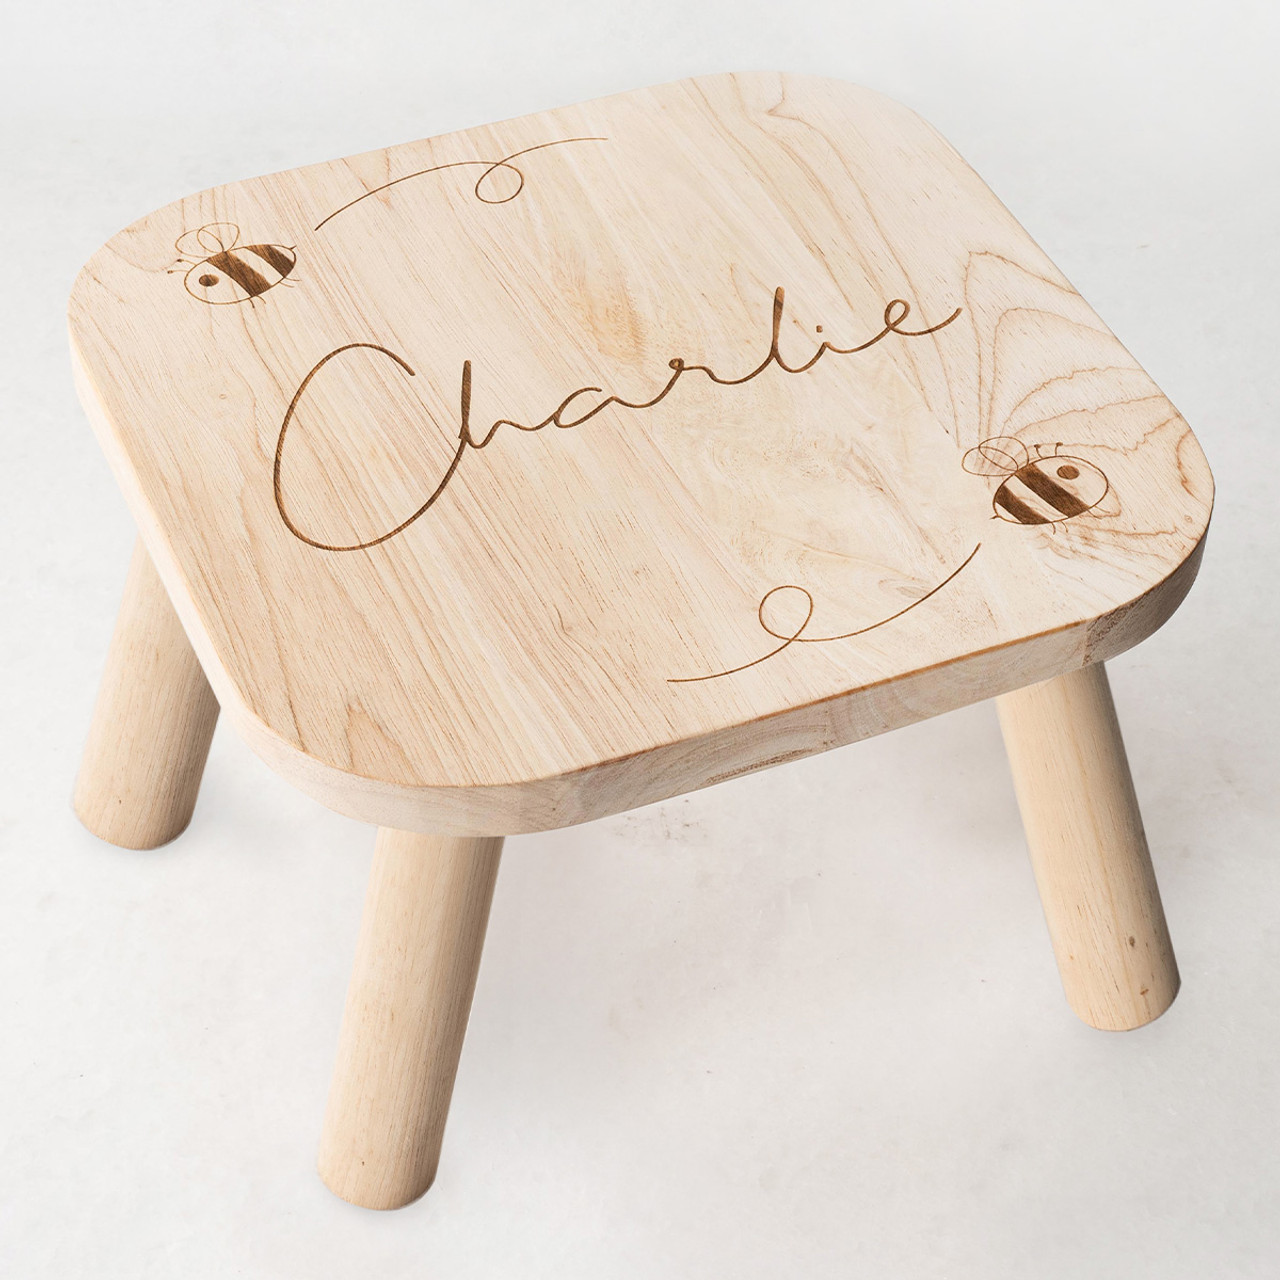 Personalized step stool